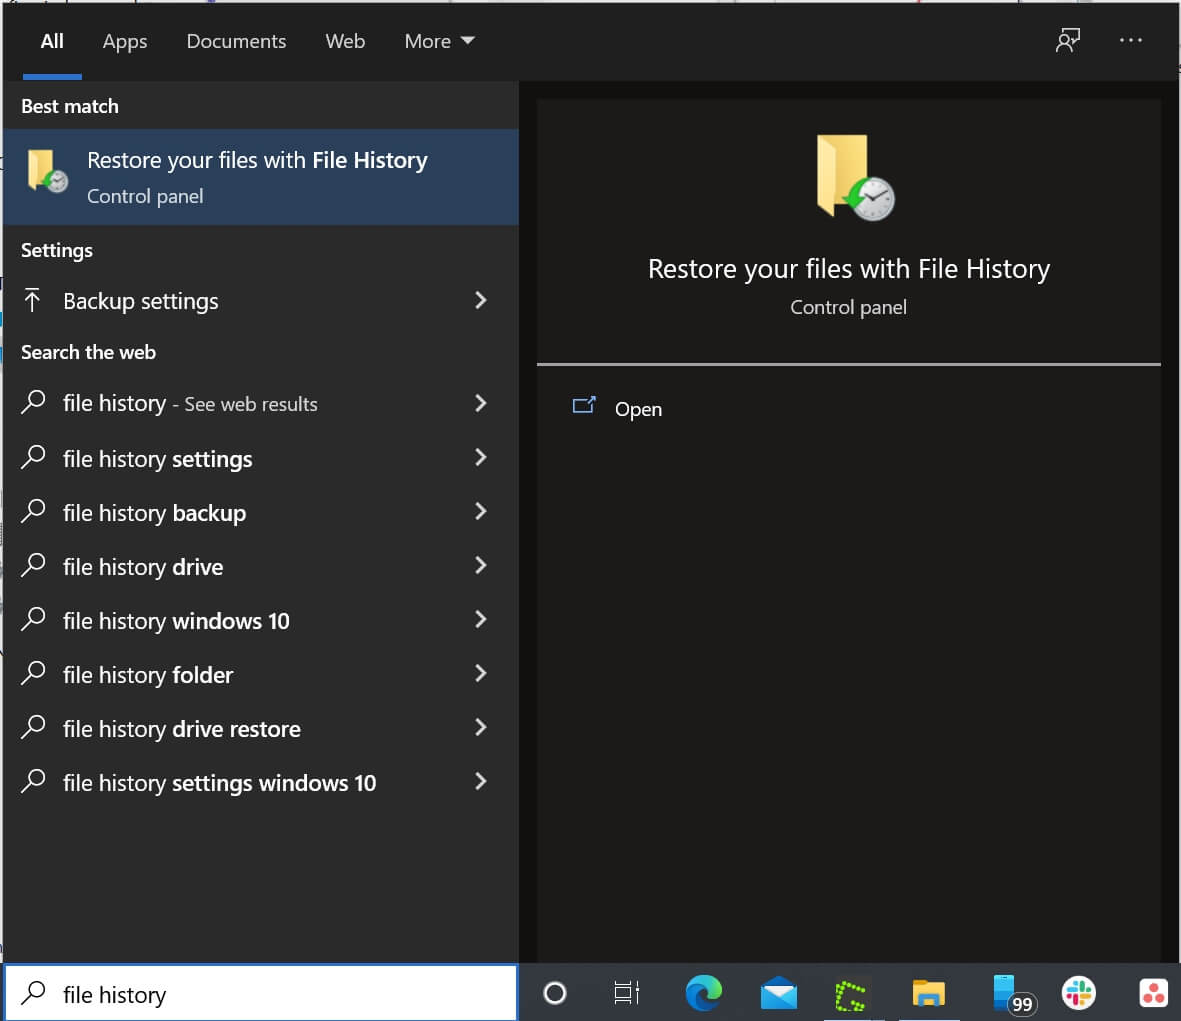 File History search results in Windows 10.